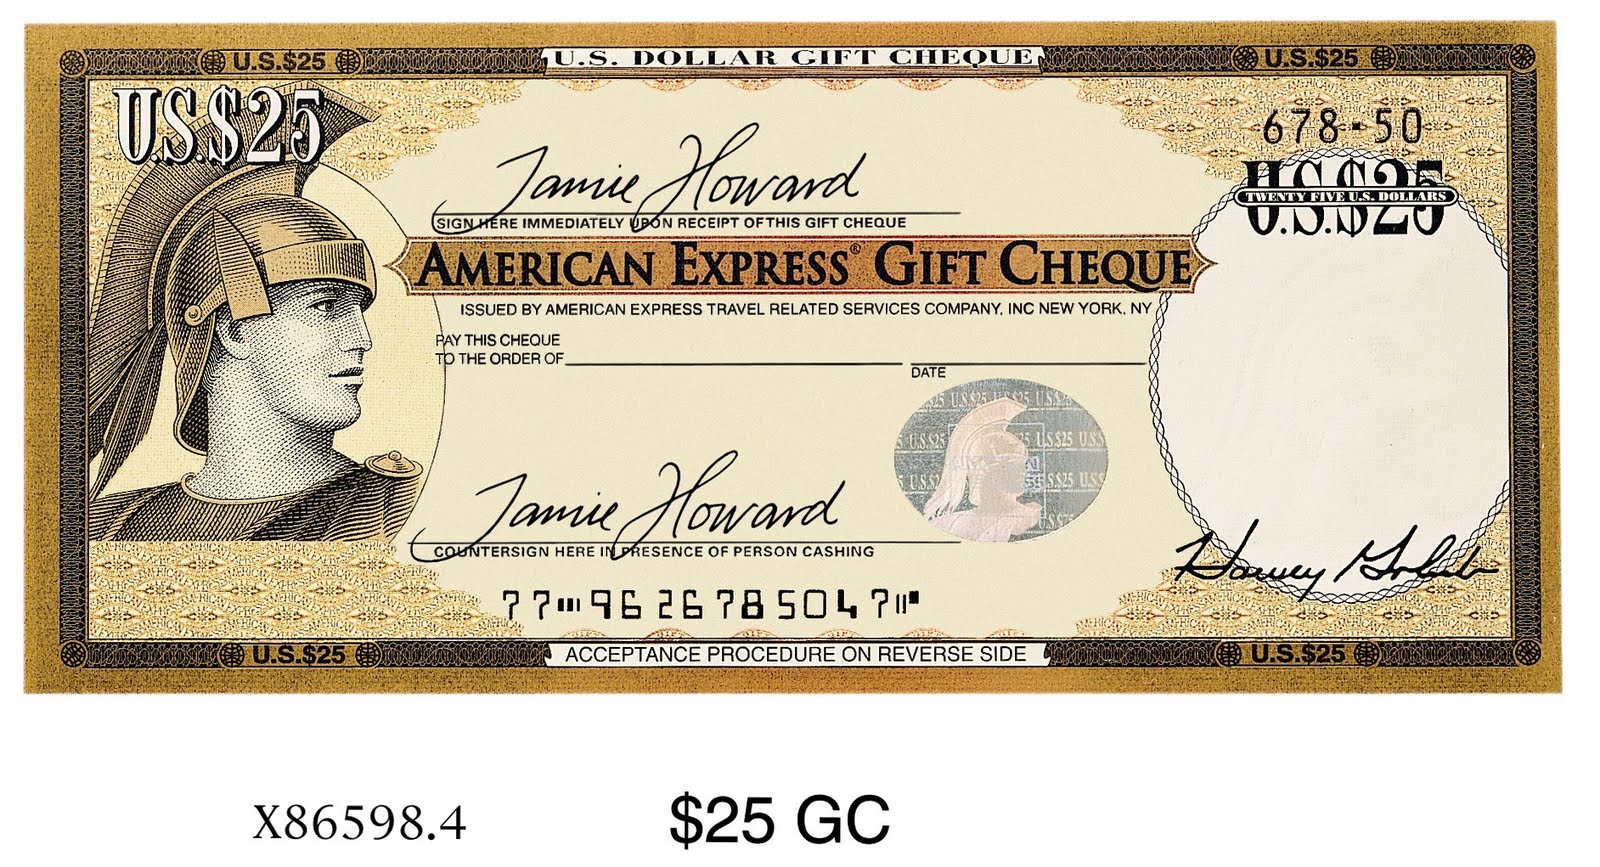 How To Cash Out American Express Gift Card / American Express Gift Card